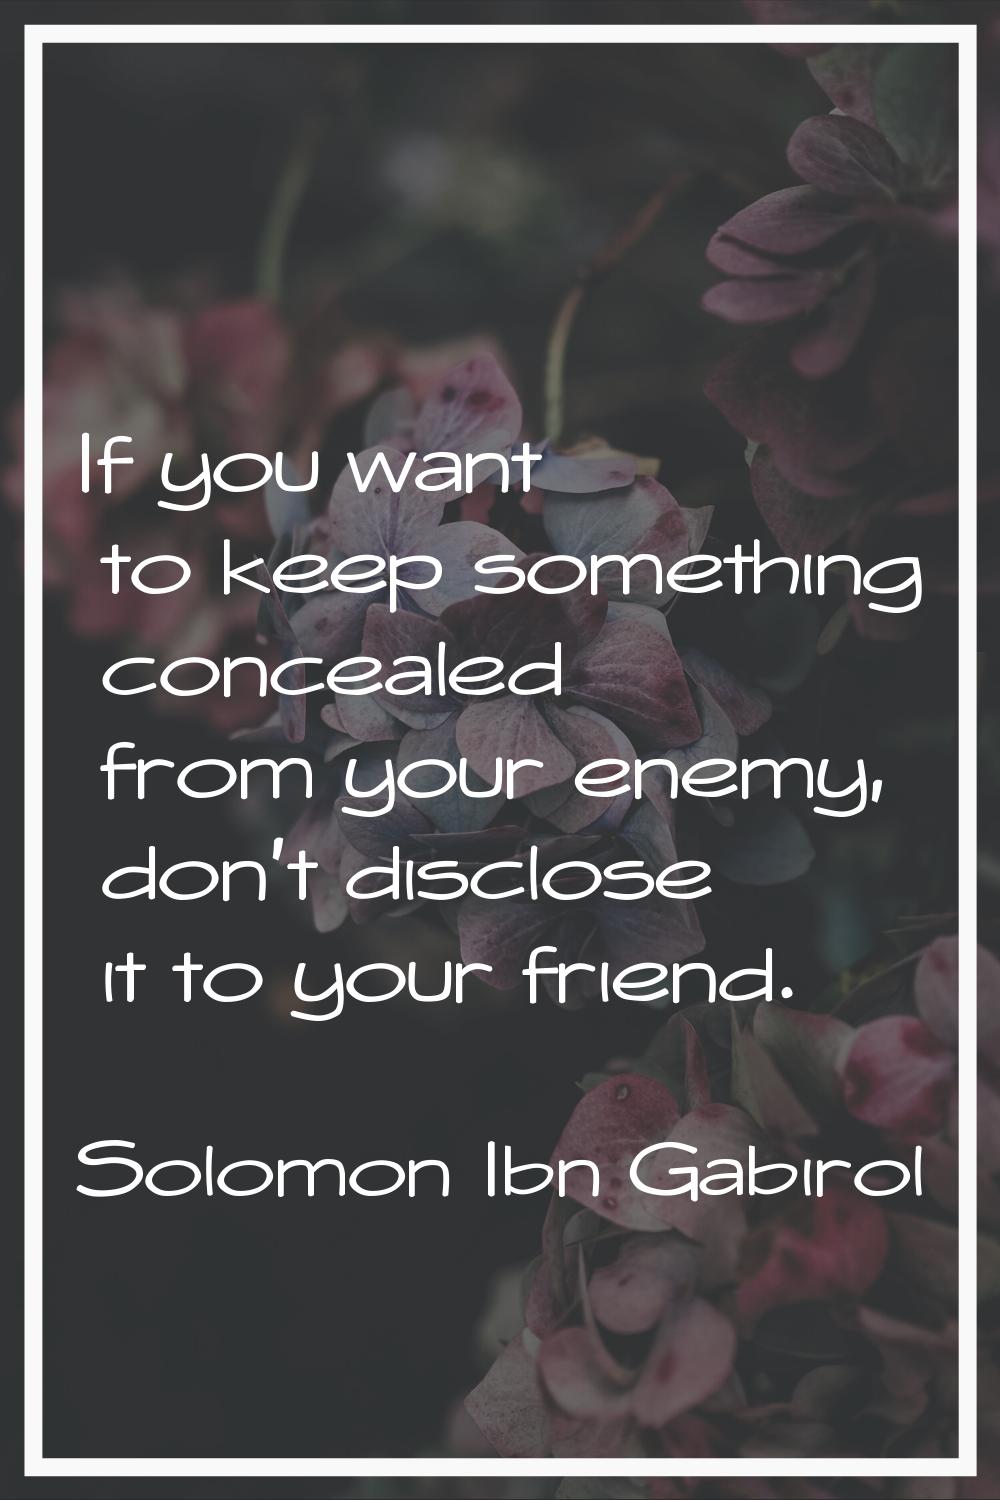 If you want to keep something concealed from your enemy, don't disclose it to your friend.